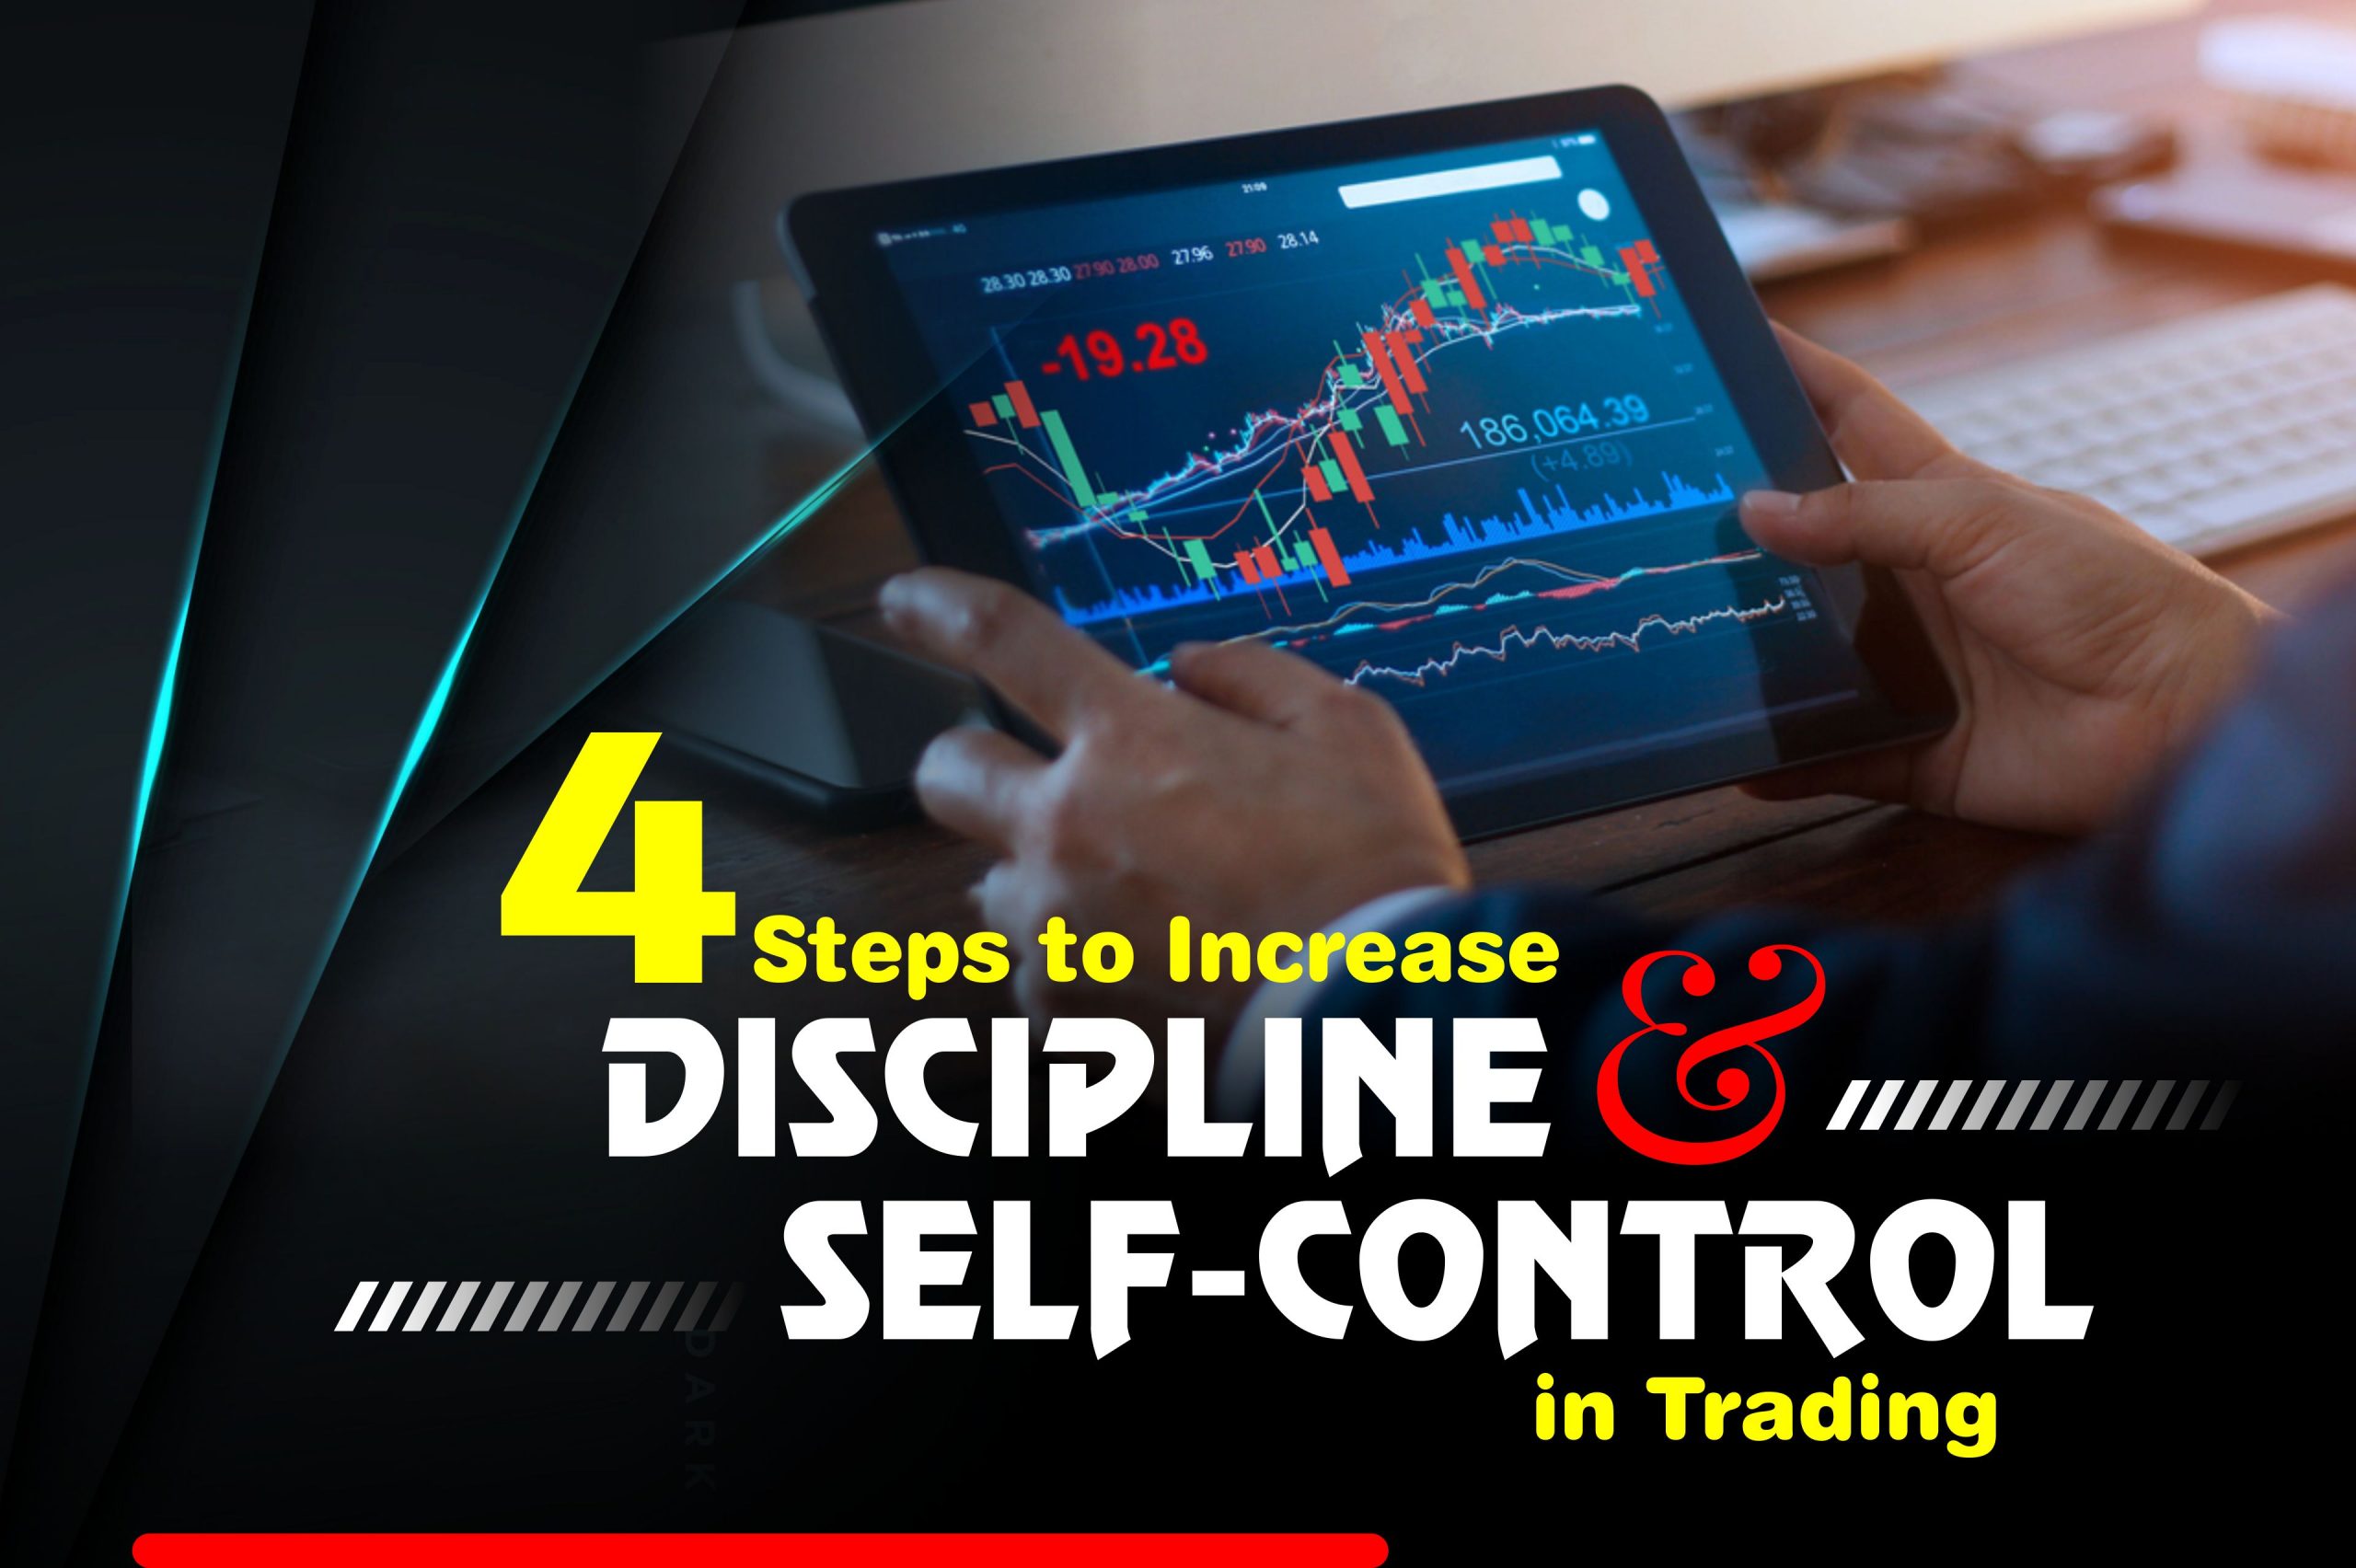 4 Steps to Increase Discipline and Self-Control in Trading